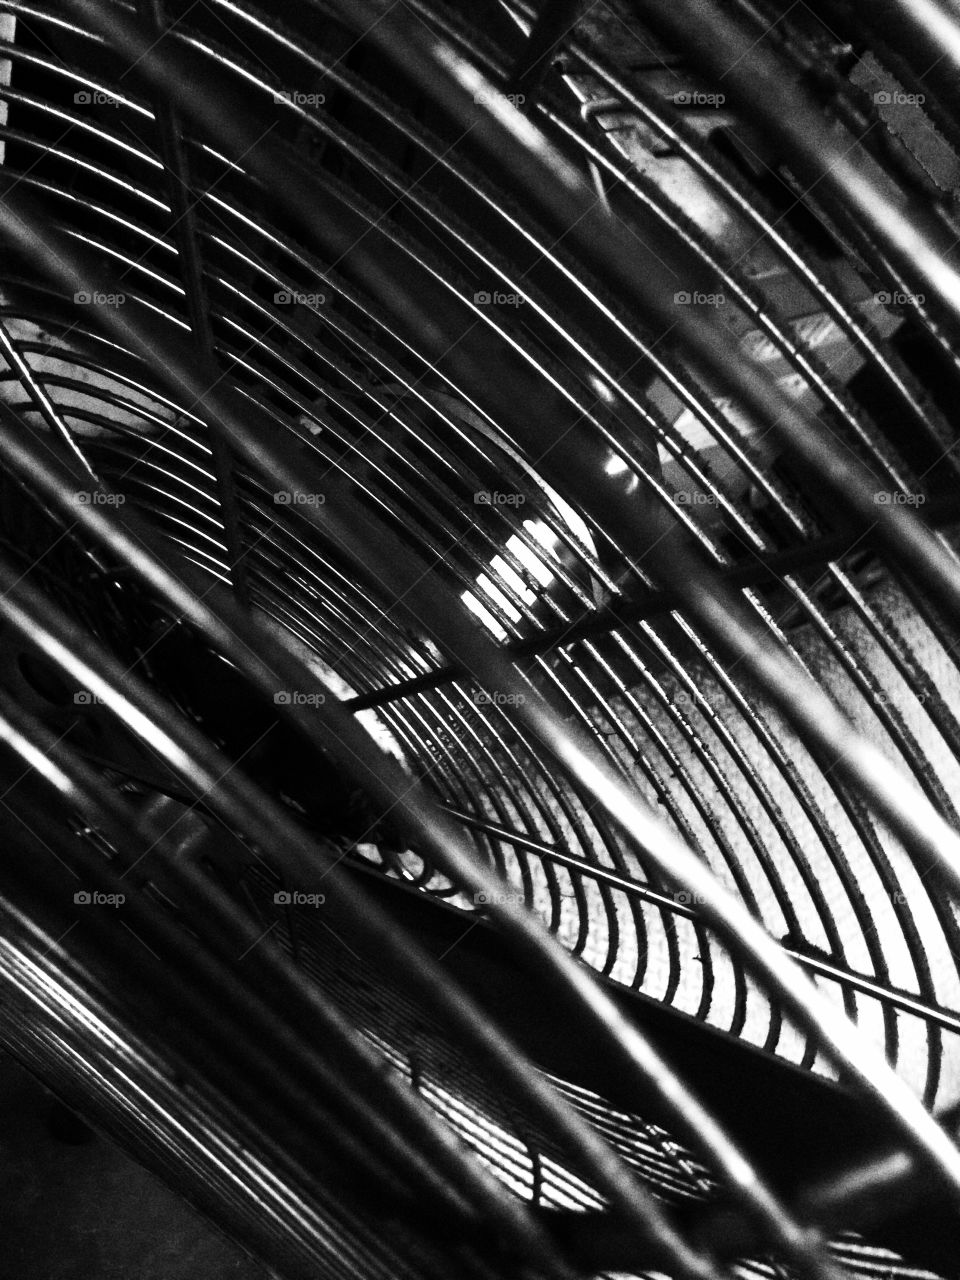 Extreme close-up of a table fan